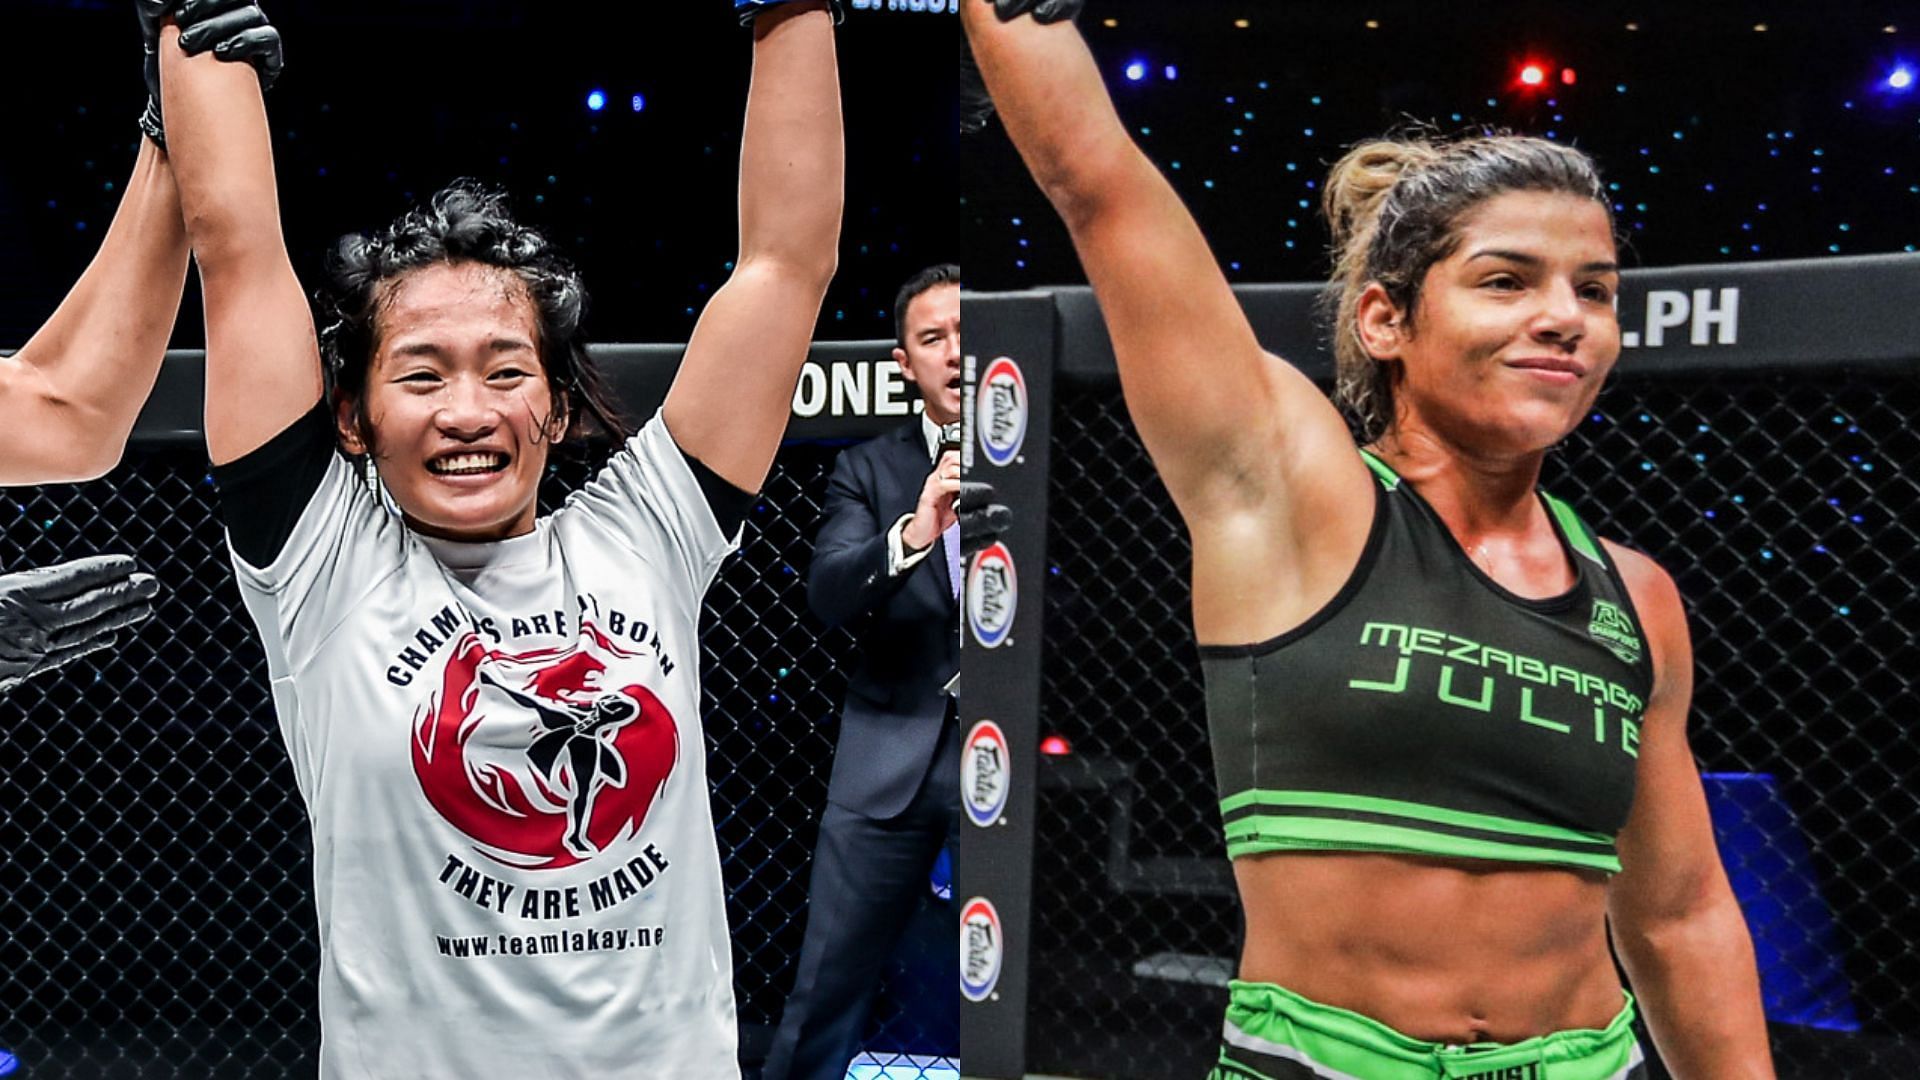 Jenelyn Olsim (left) and Julie Mezabarba (right) [Photo Credits: ONE Championship]